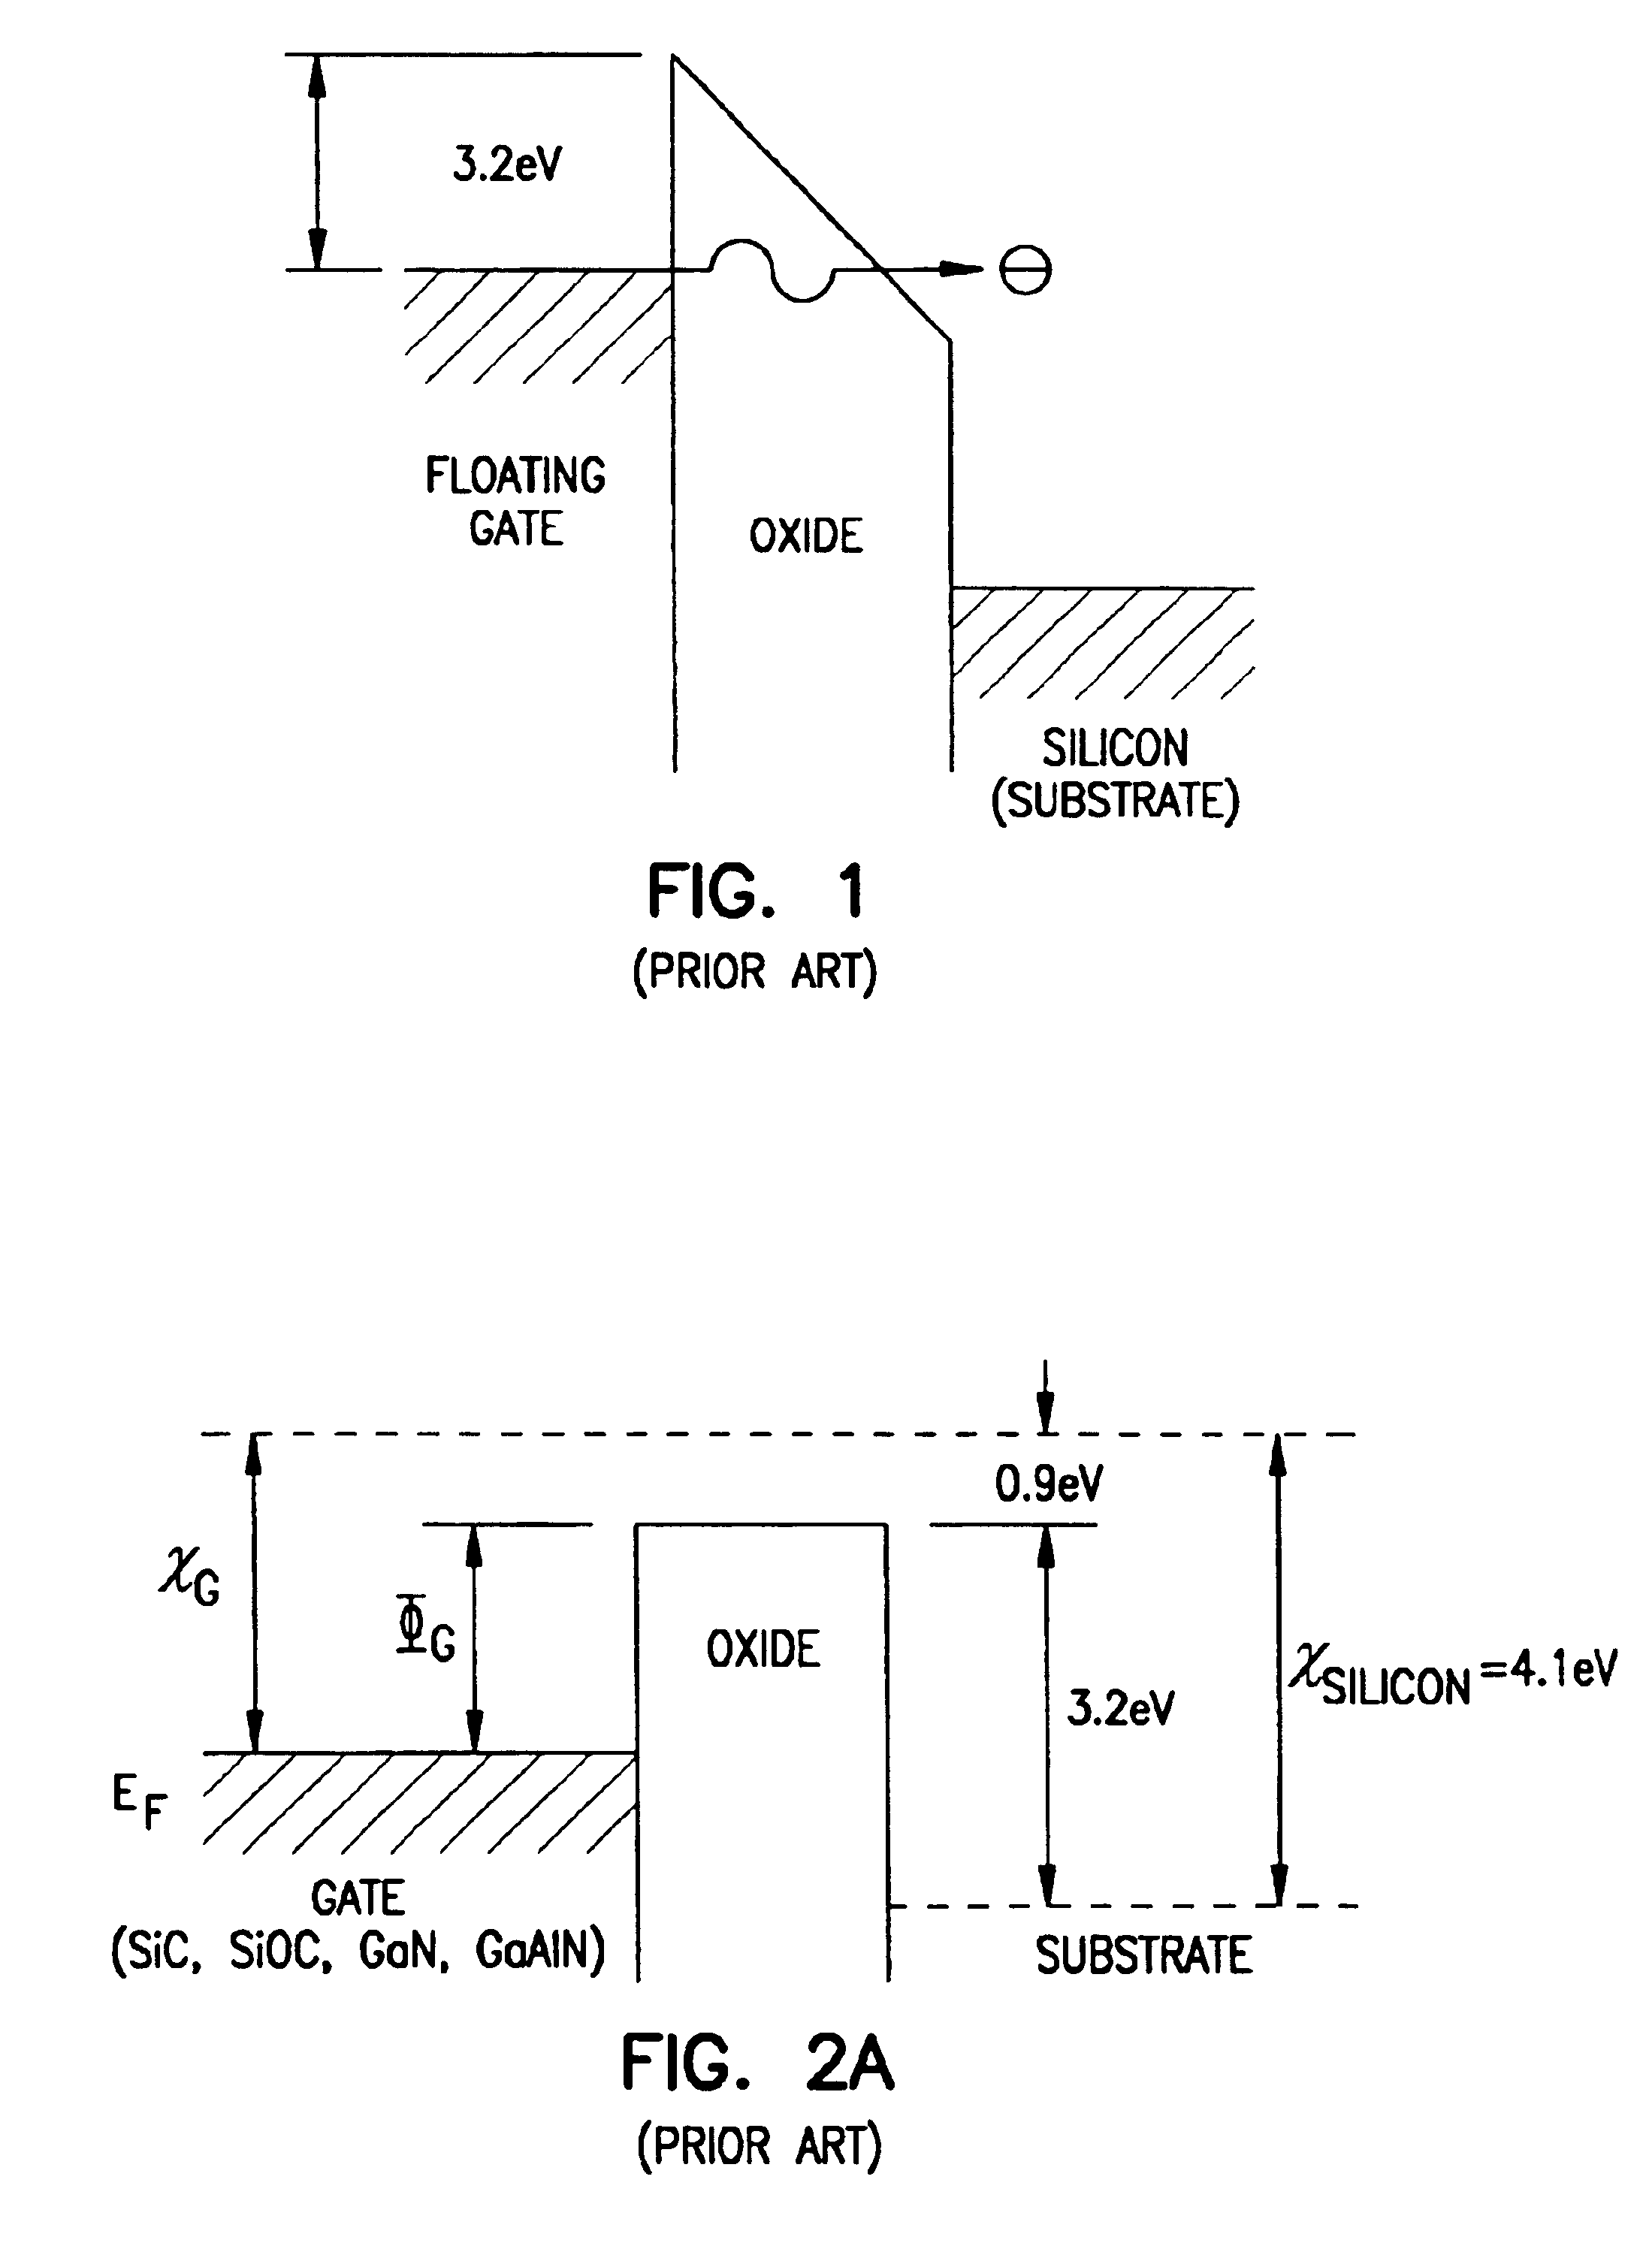 Graded composition gate insulators to reduce tunneling barriers in flash memory devices